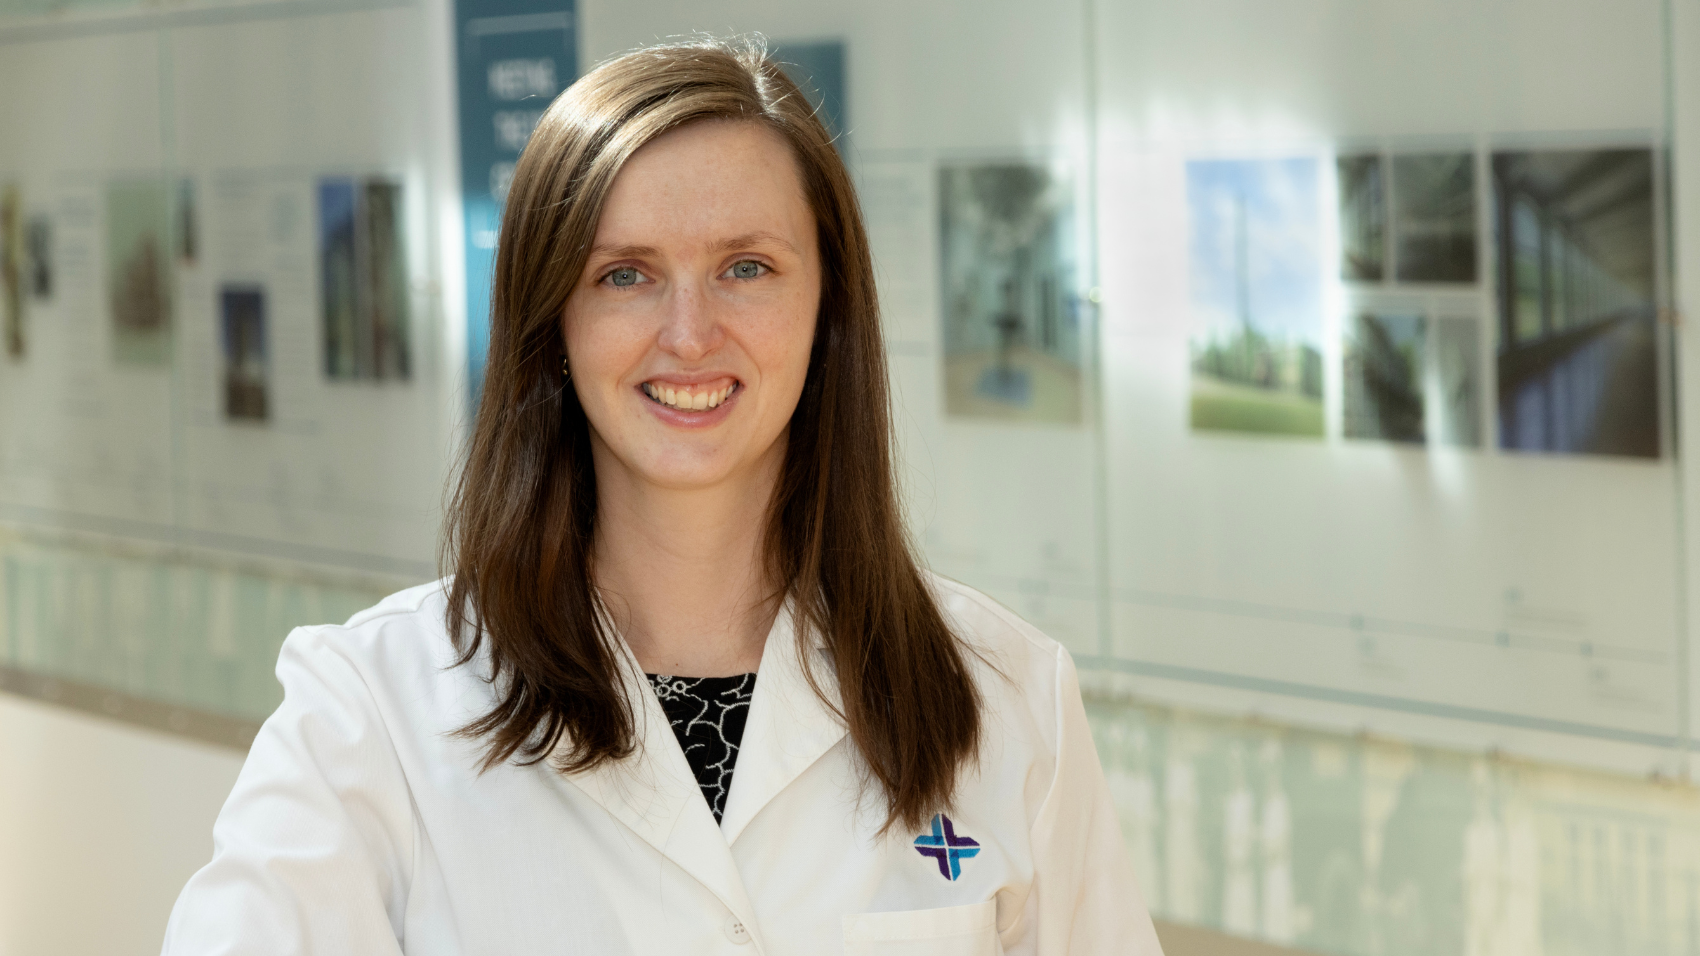 Dr. Laura Galloway sees pediatrics as &lsquo;taking care of the entire family&rsquo;